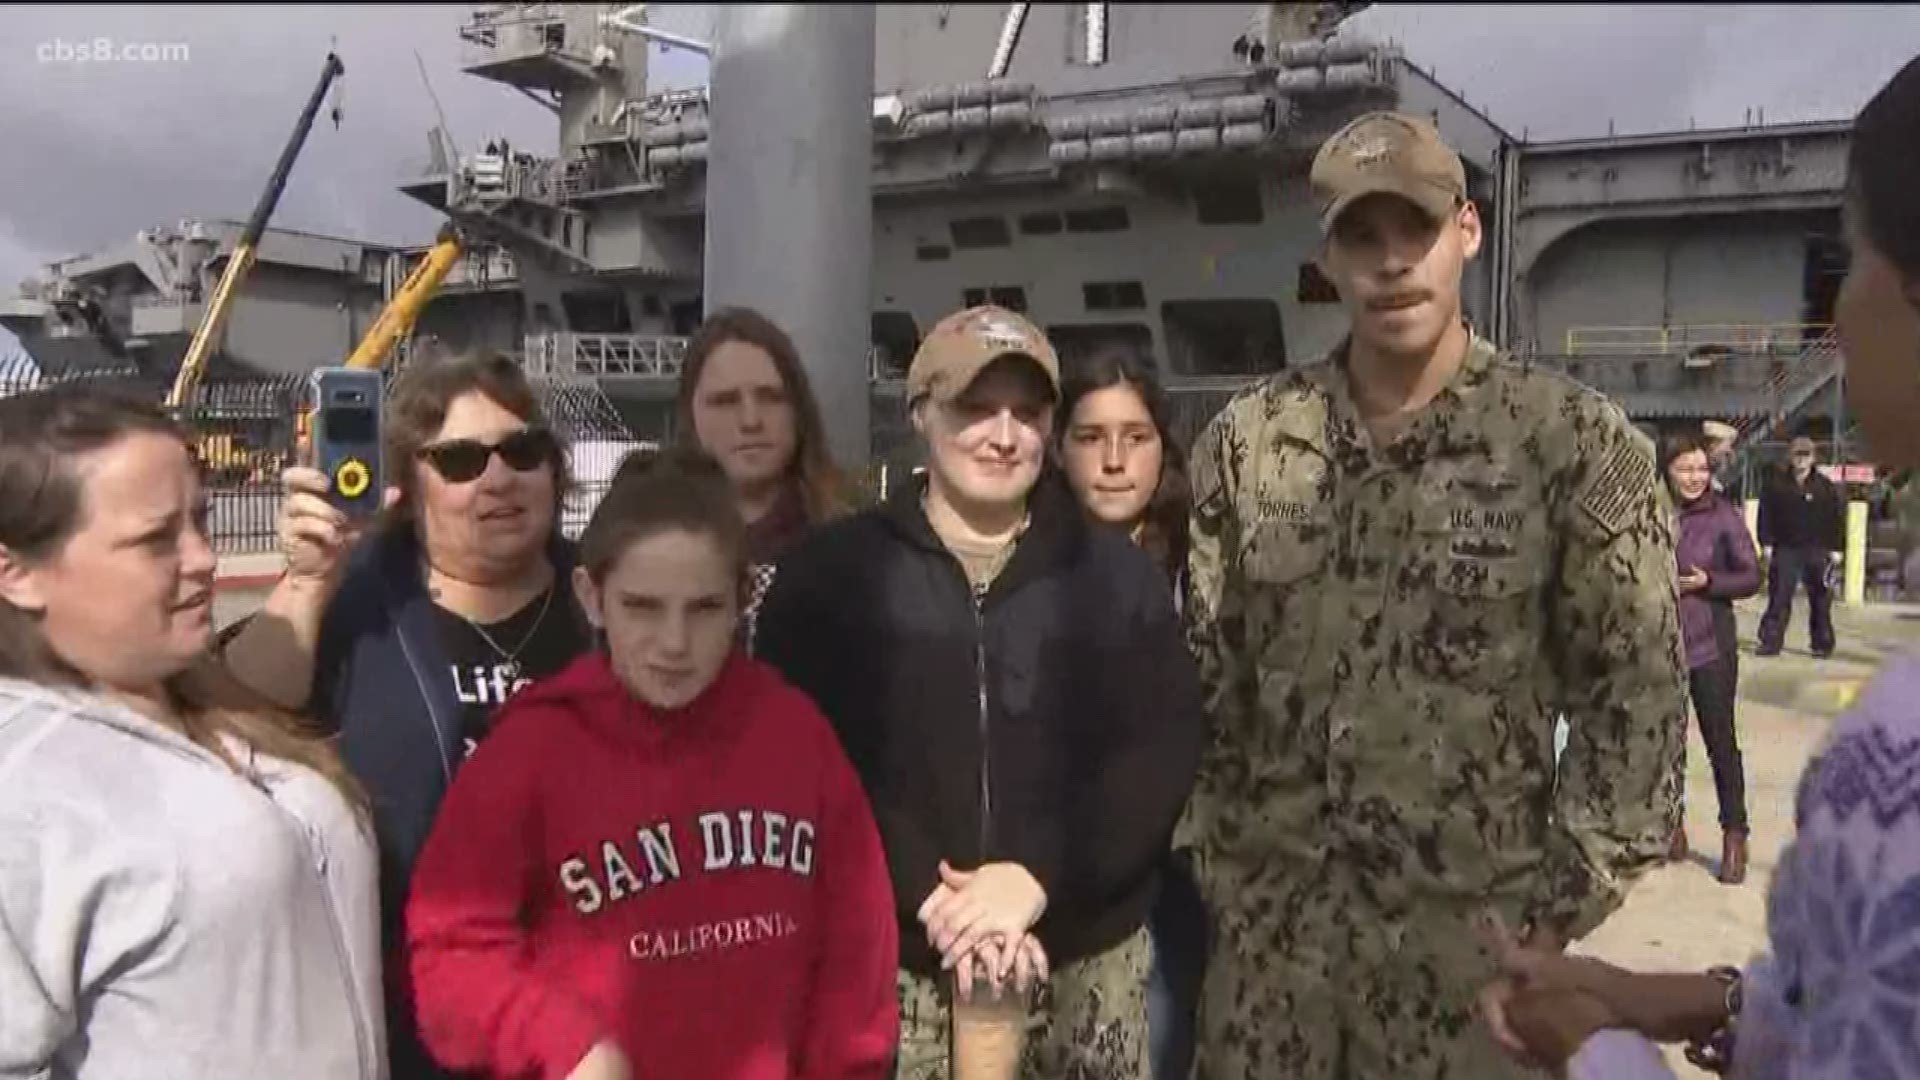 Military members are saying "see you later" to their families as they prepare to deploy.